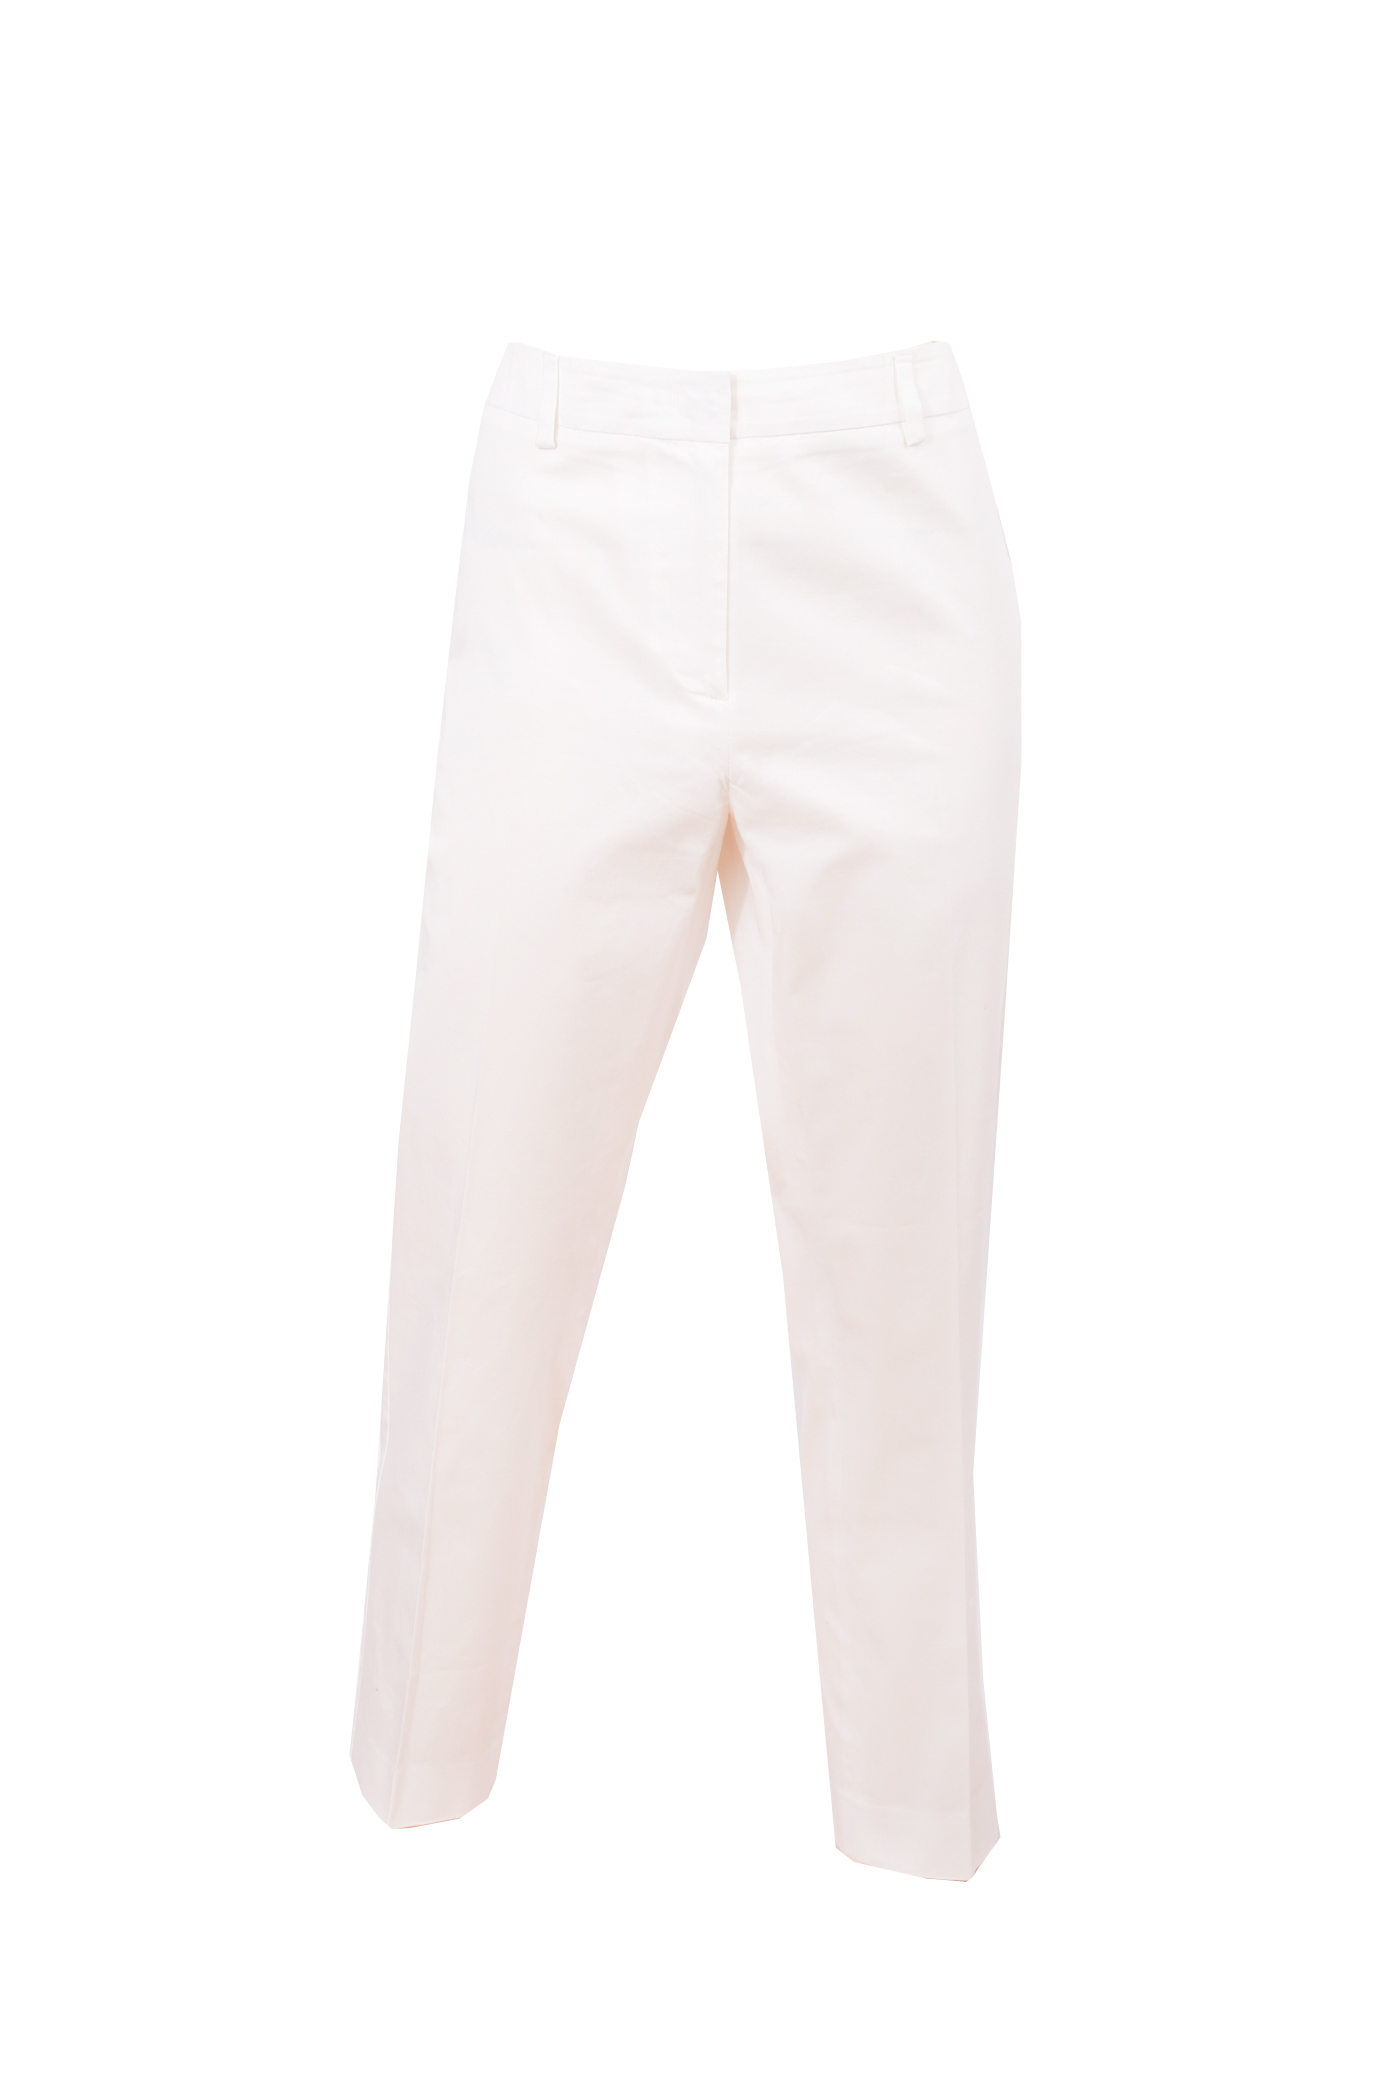 Weekend Max Mara White Trousers - Preowned